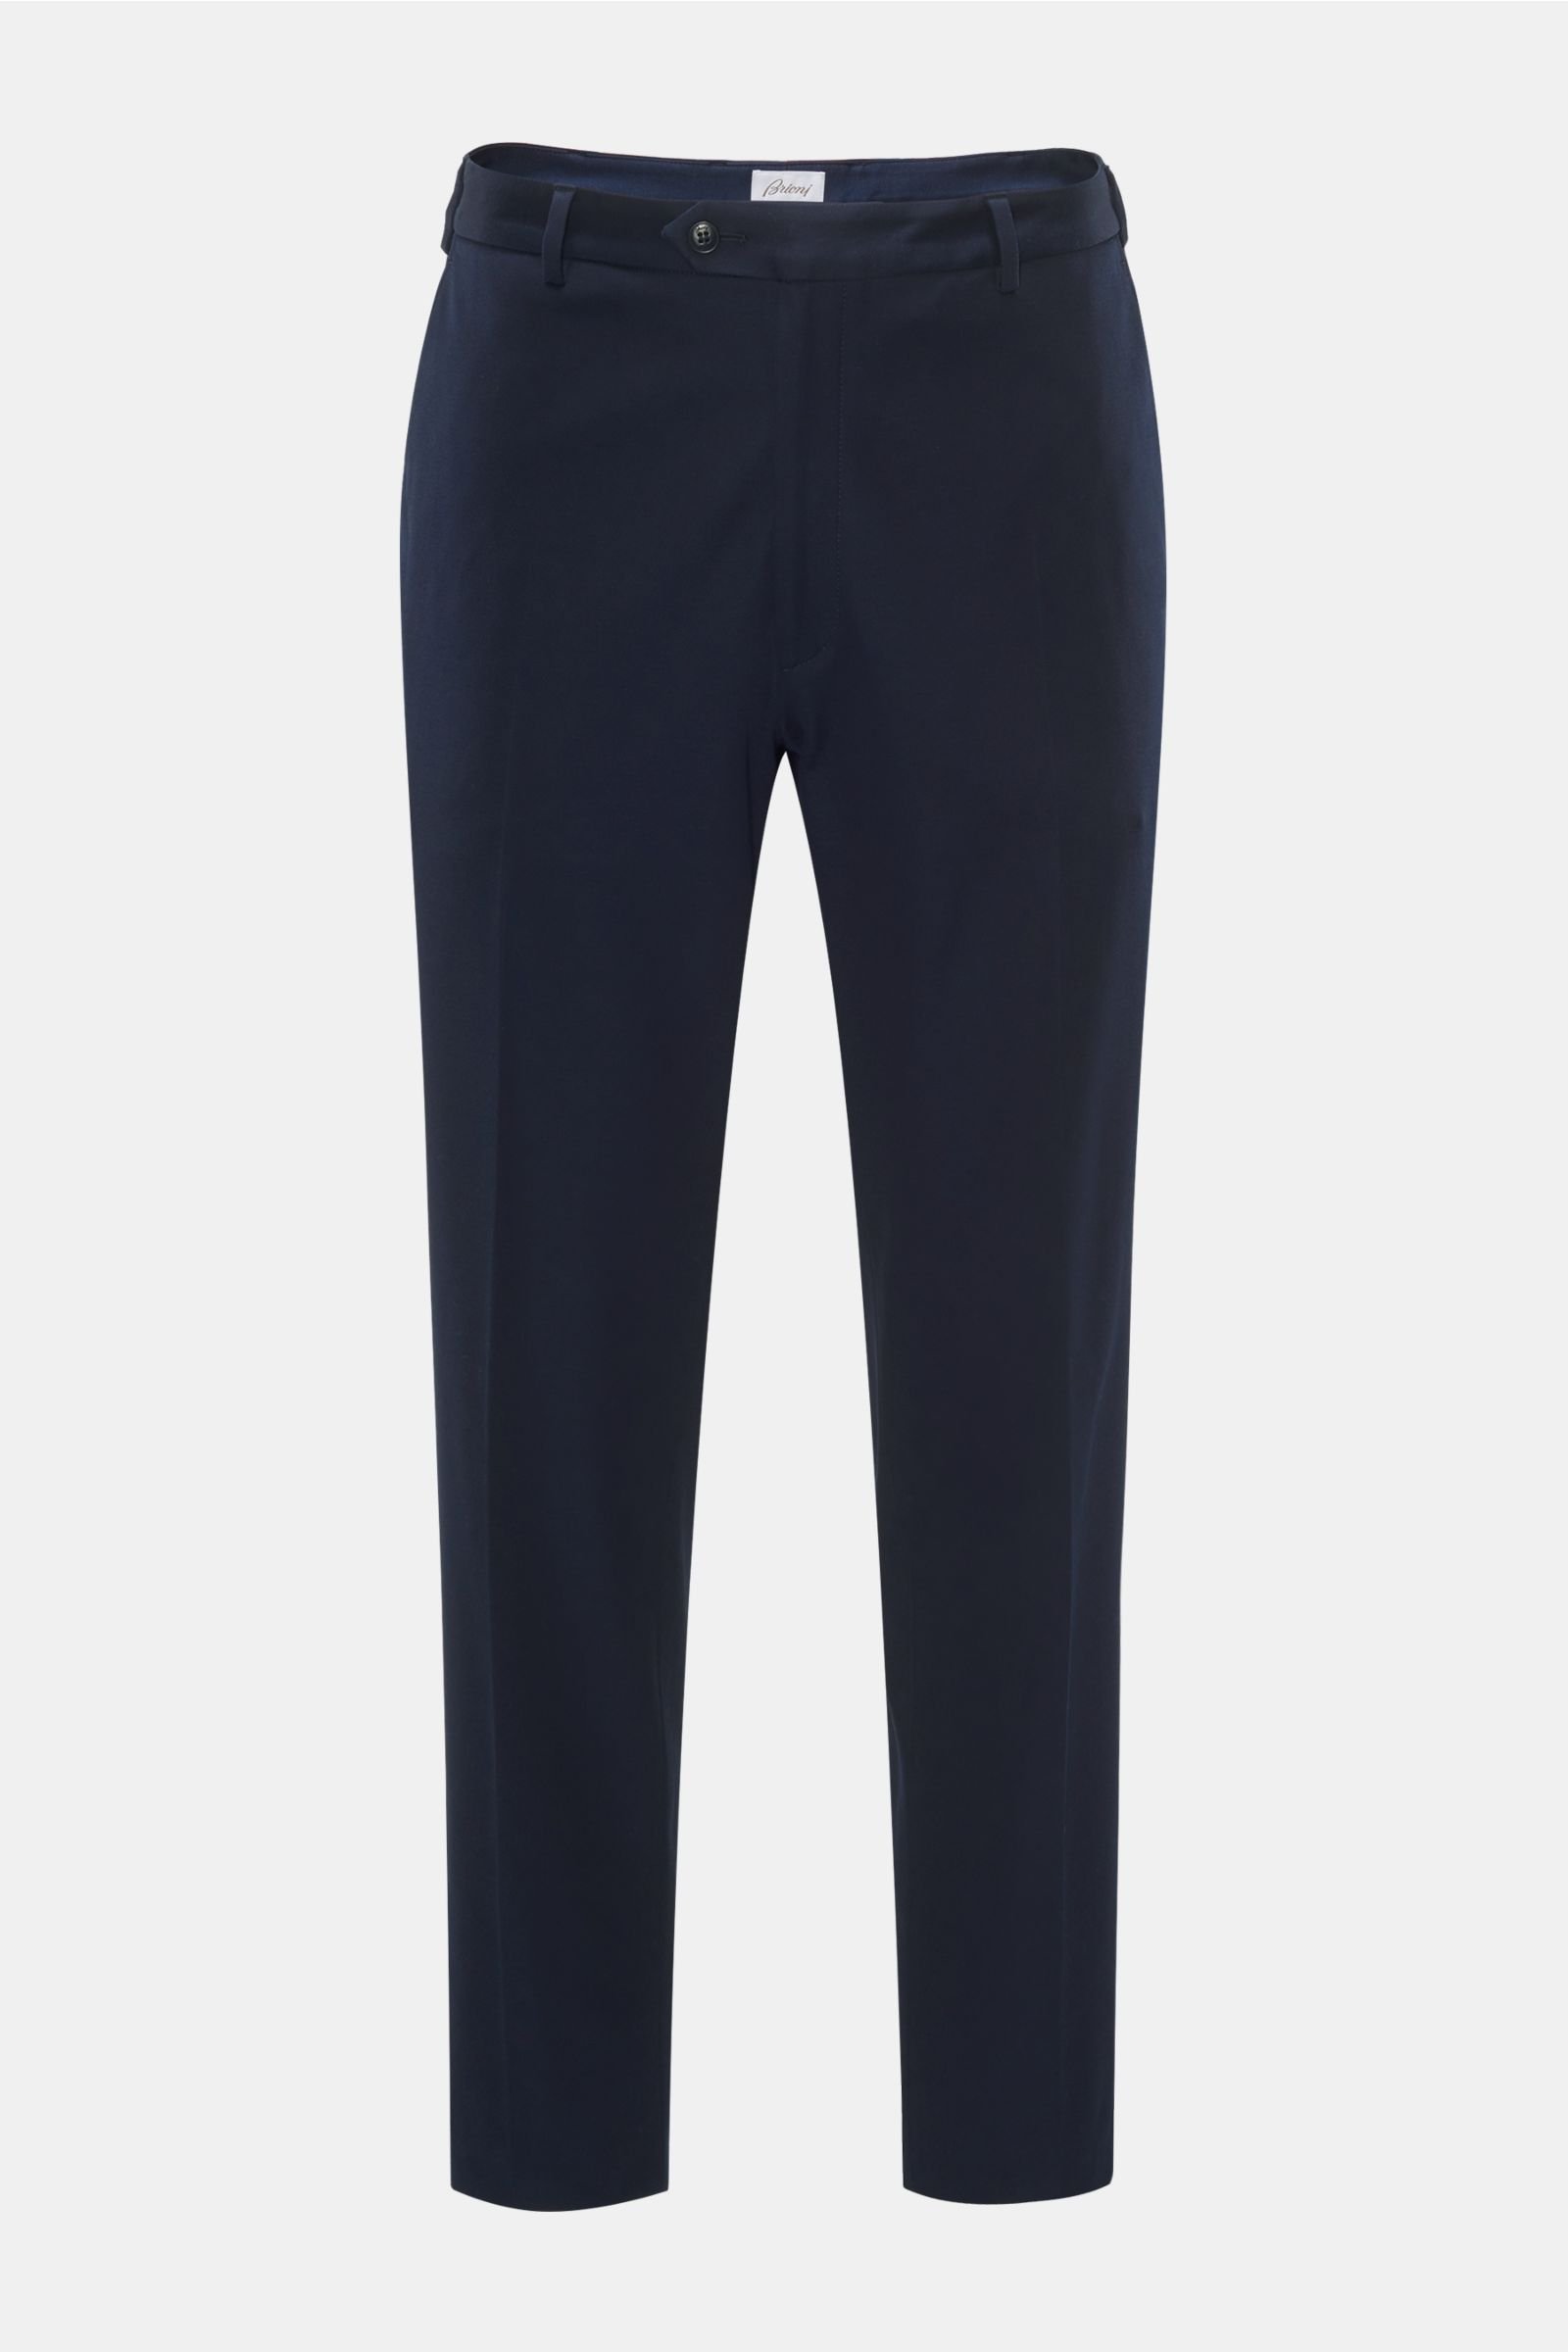 Jersey cotton trousers navy